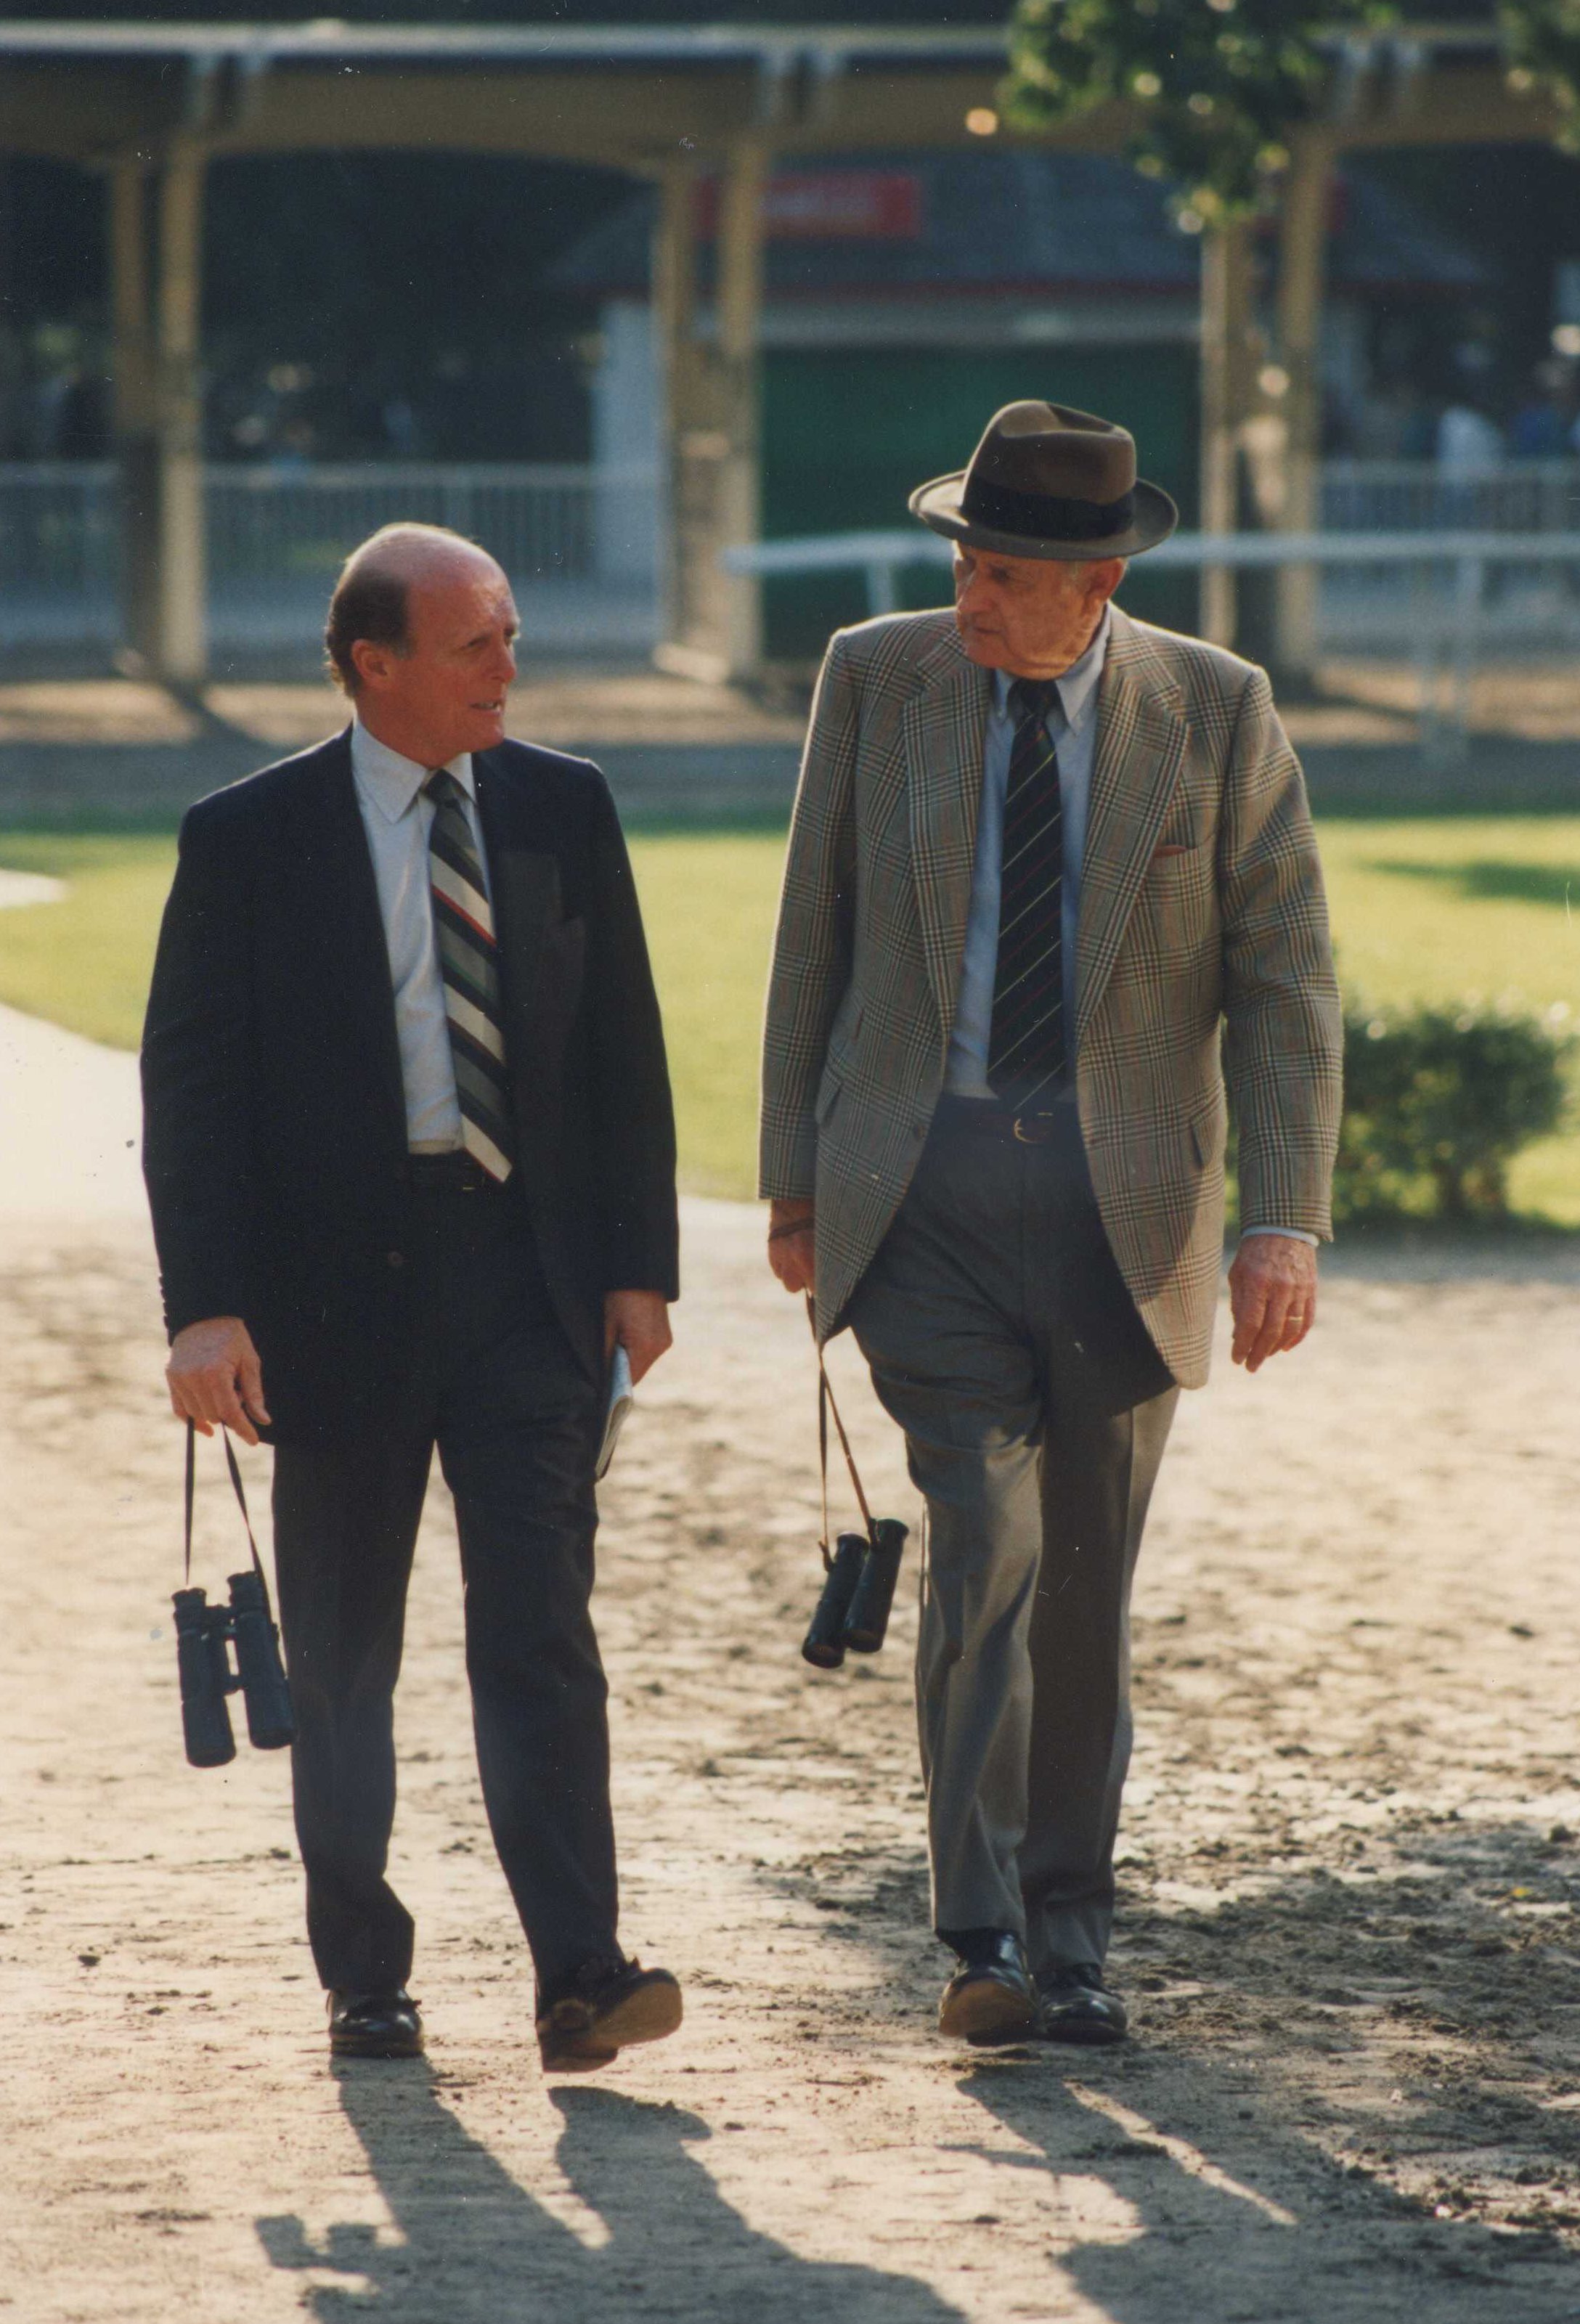 Hall of Fame trainers LeRoy Jolley and MacKenzie Miller walking in the Belmont Park paddock in 1992 (Barbara D. Livingston/Museum Collection)